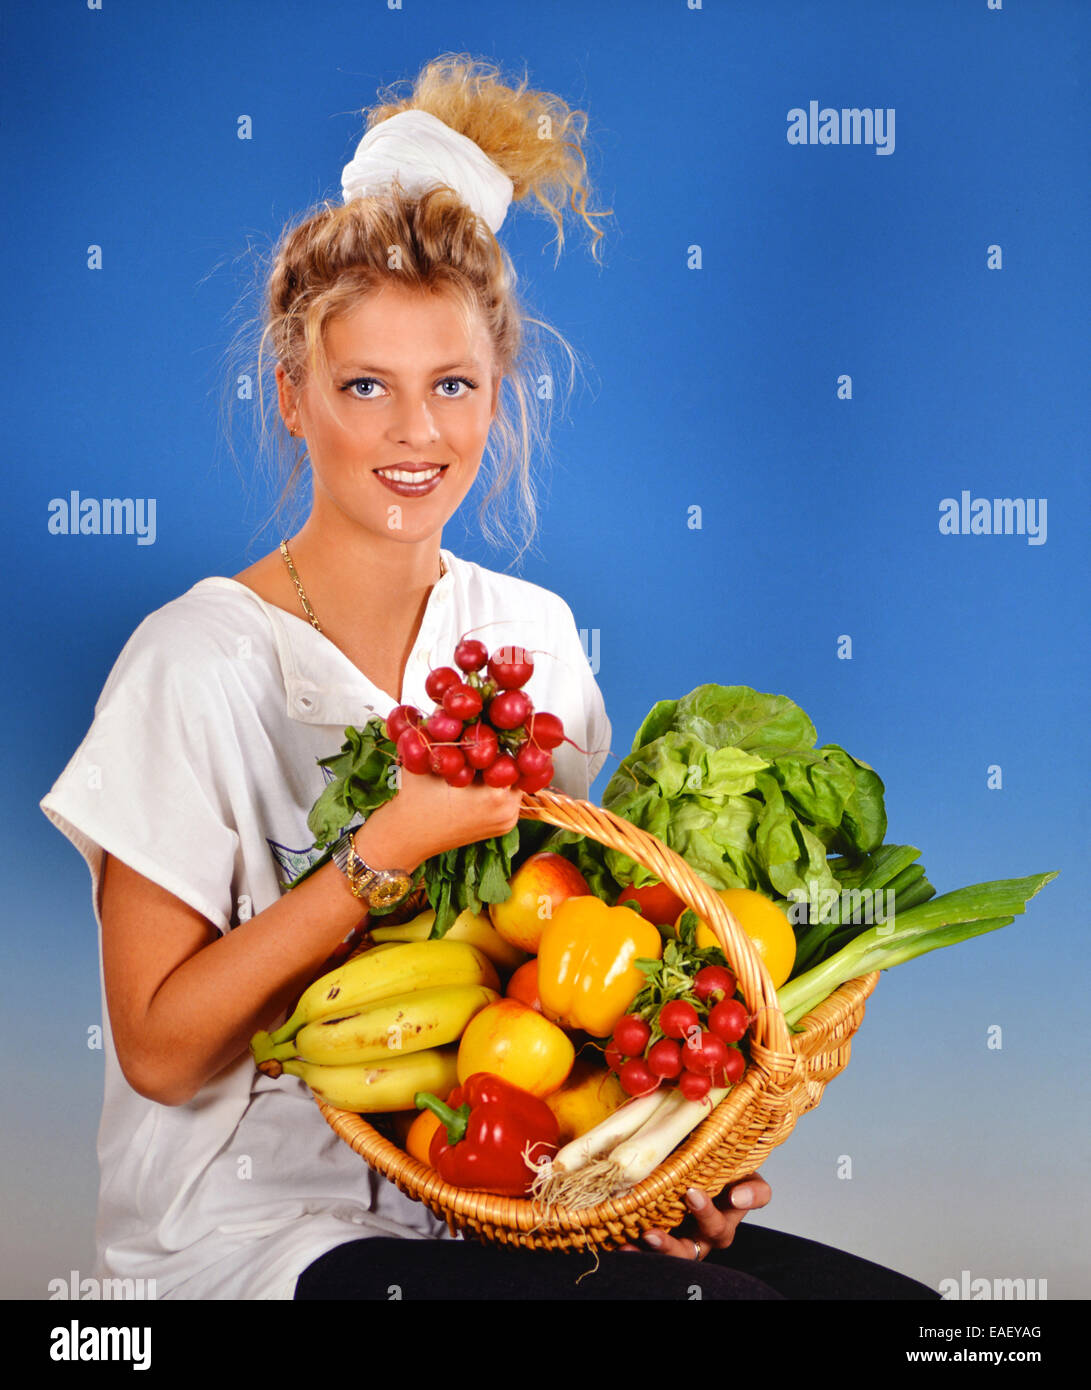 Blond woman with a basket full with fruits and vegetables Stock Photo